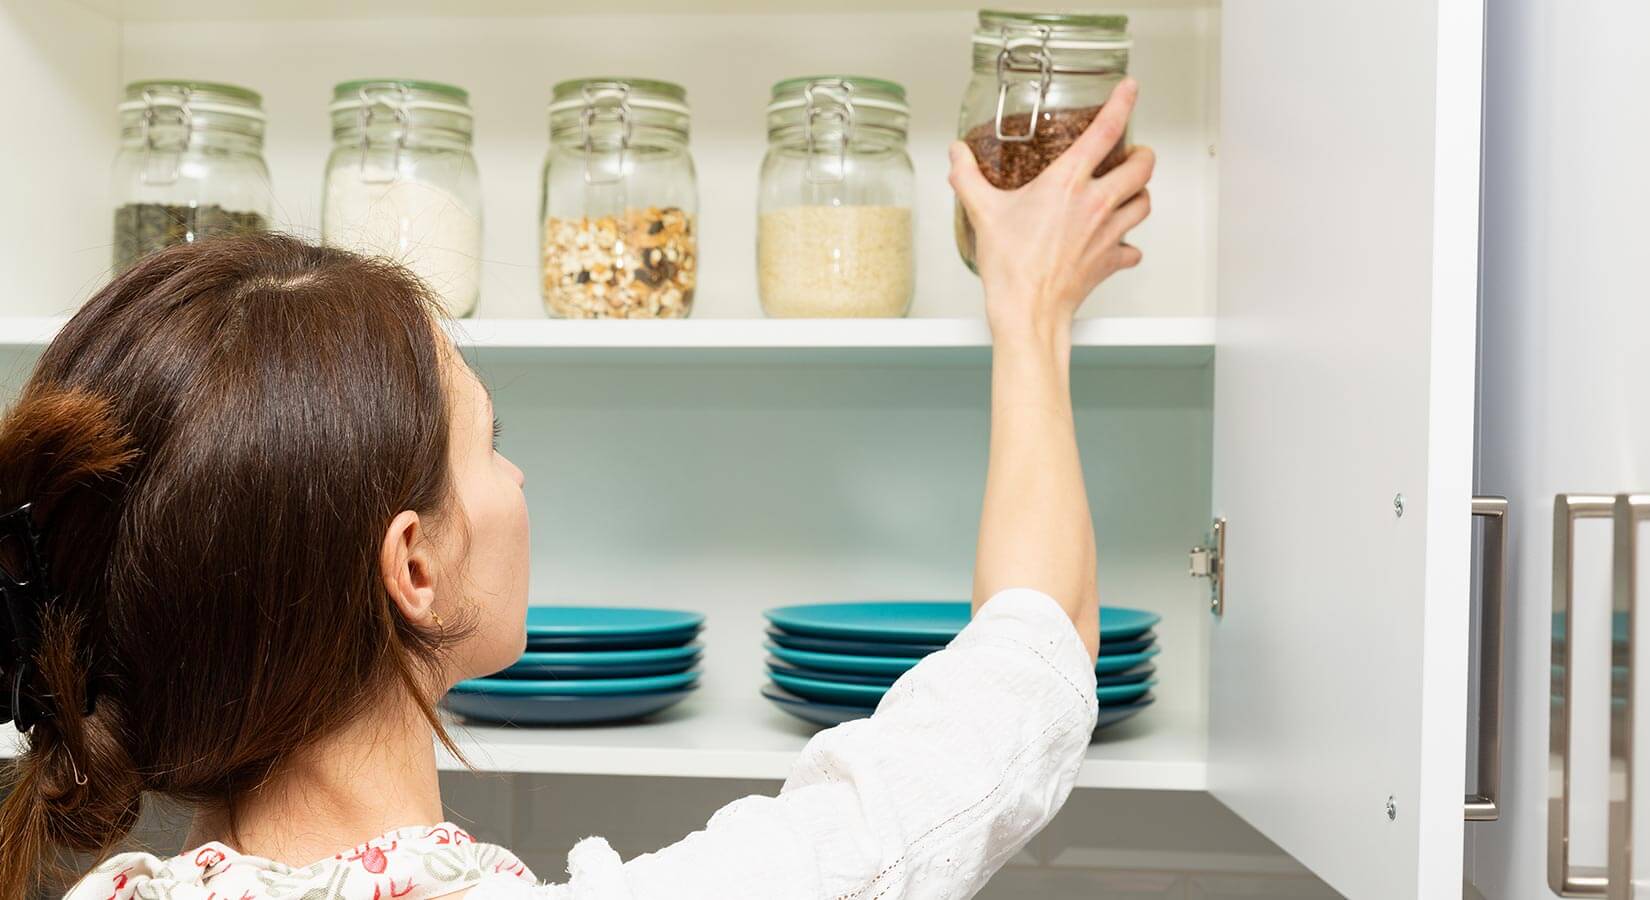 Women placing dry ingredients in glass jars inside white kitchen cabinets above blue plates.